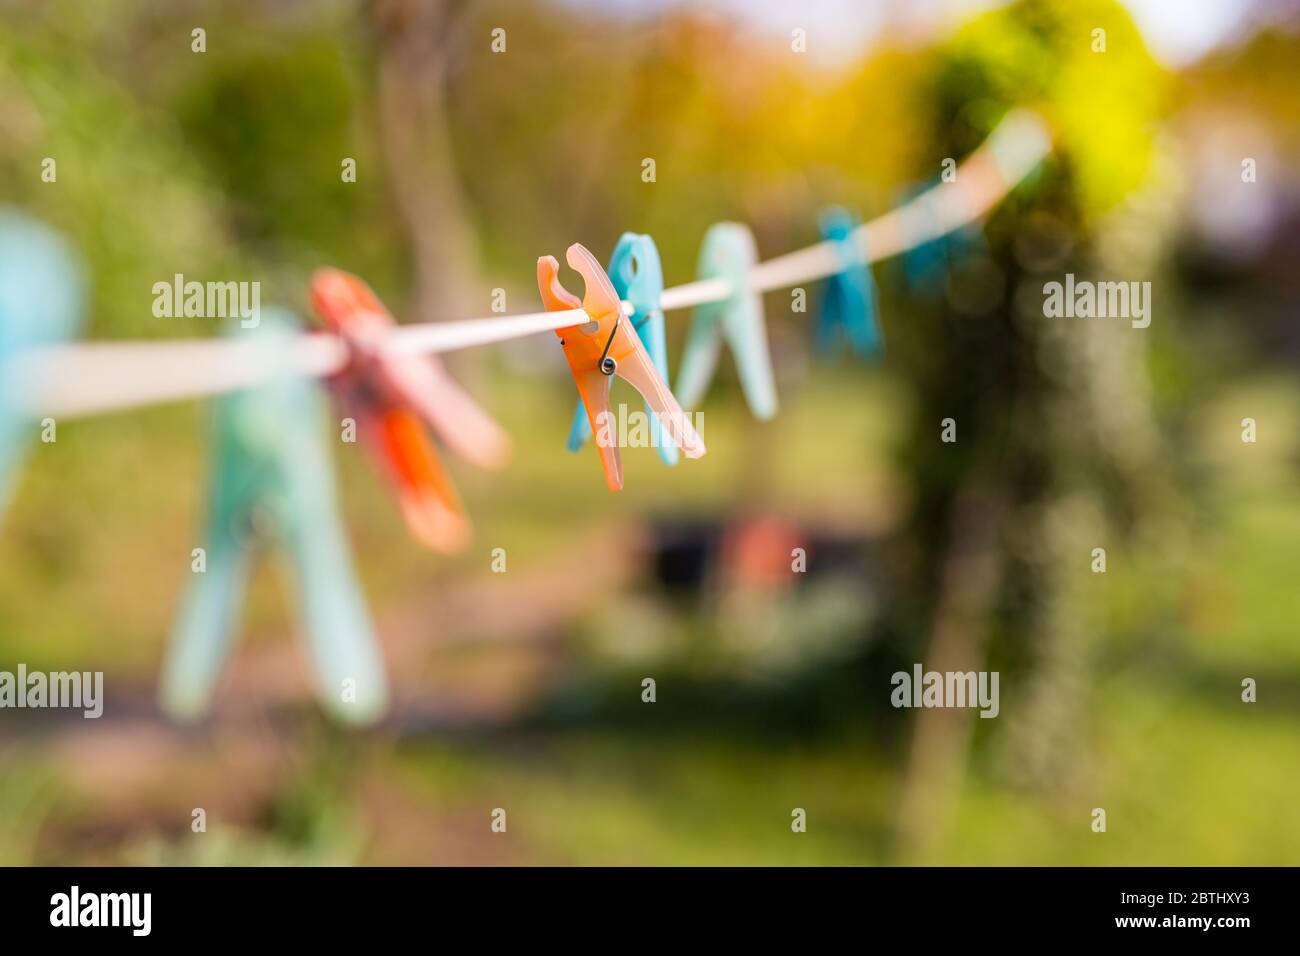 Orange and blue cloth clip on clothes line, blur nature green background Stock Photo